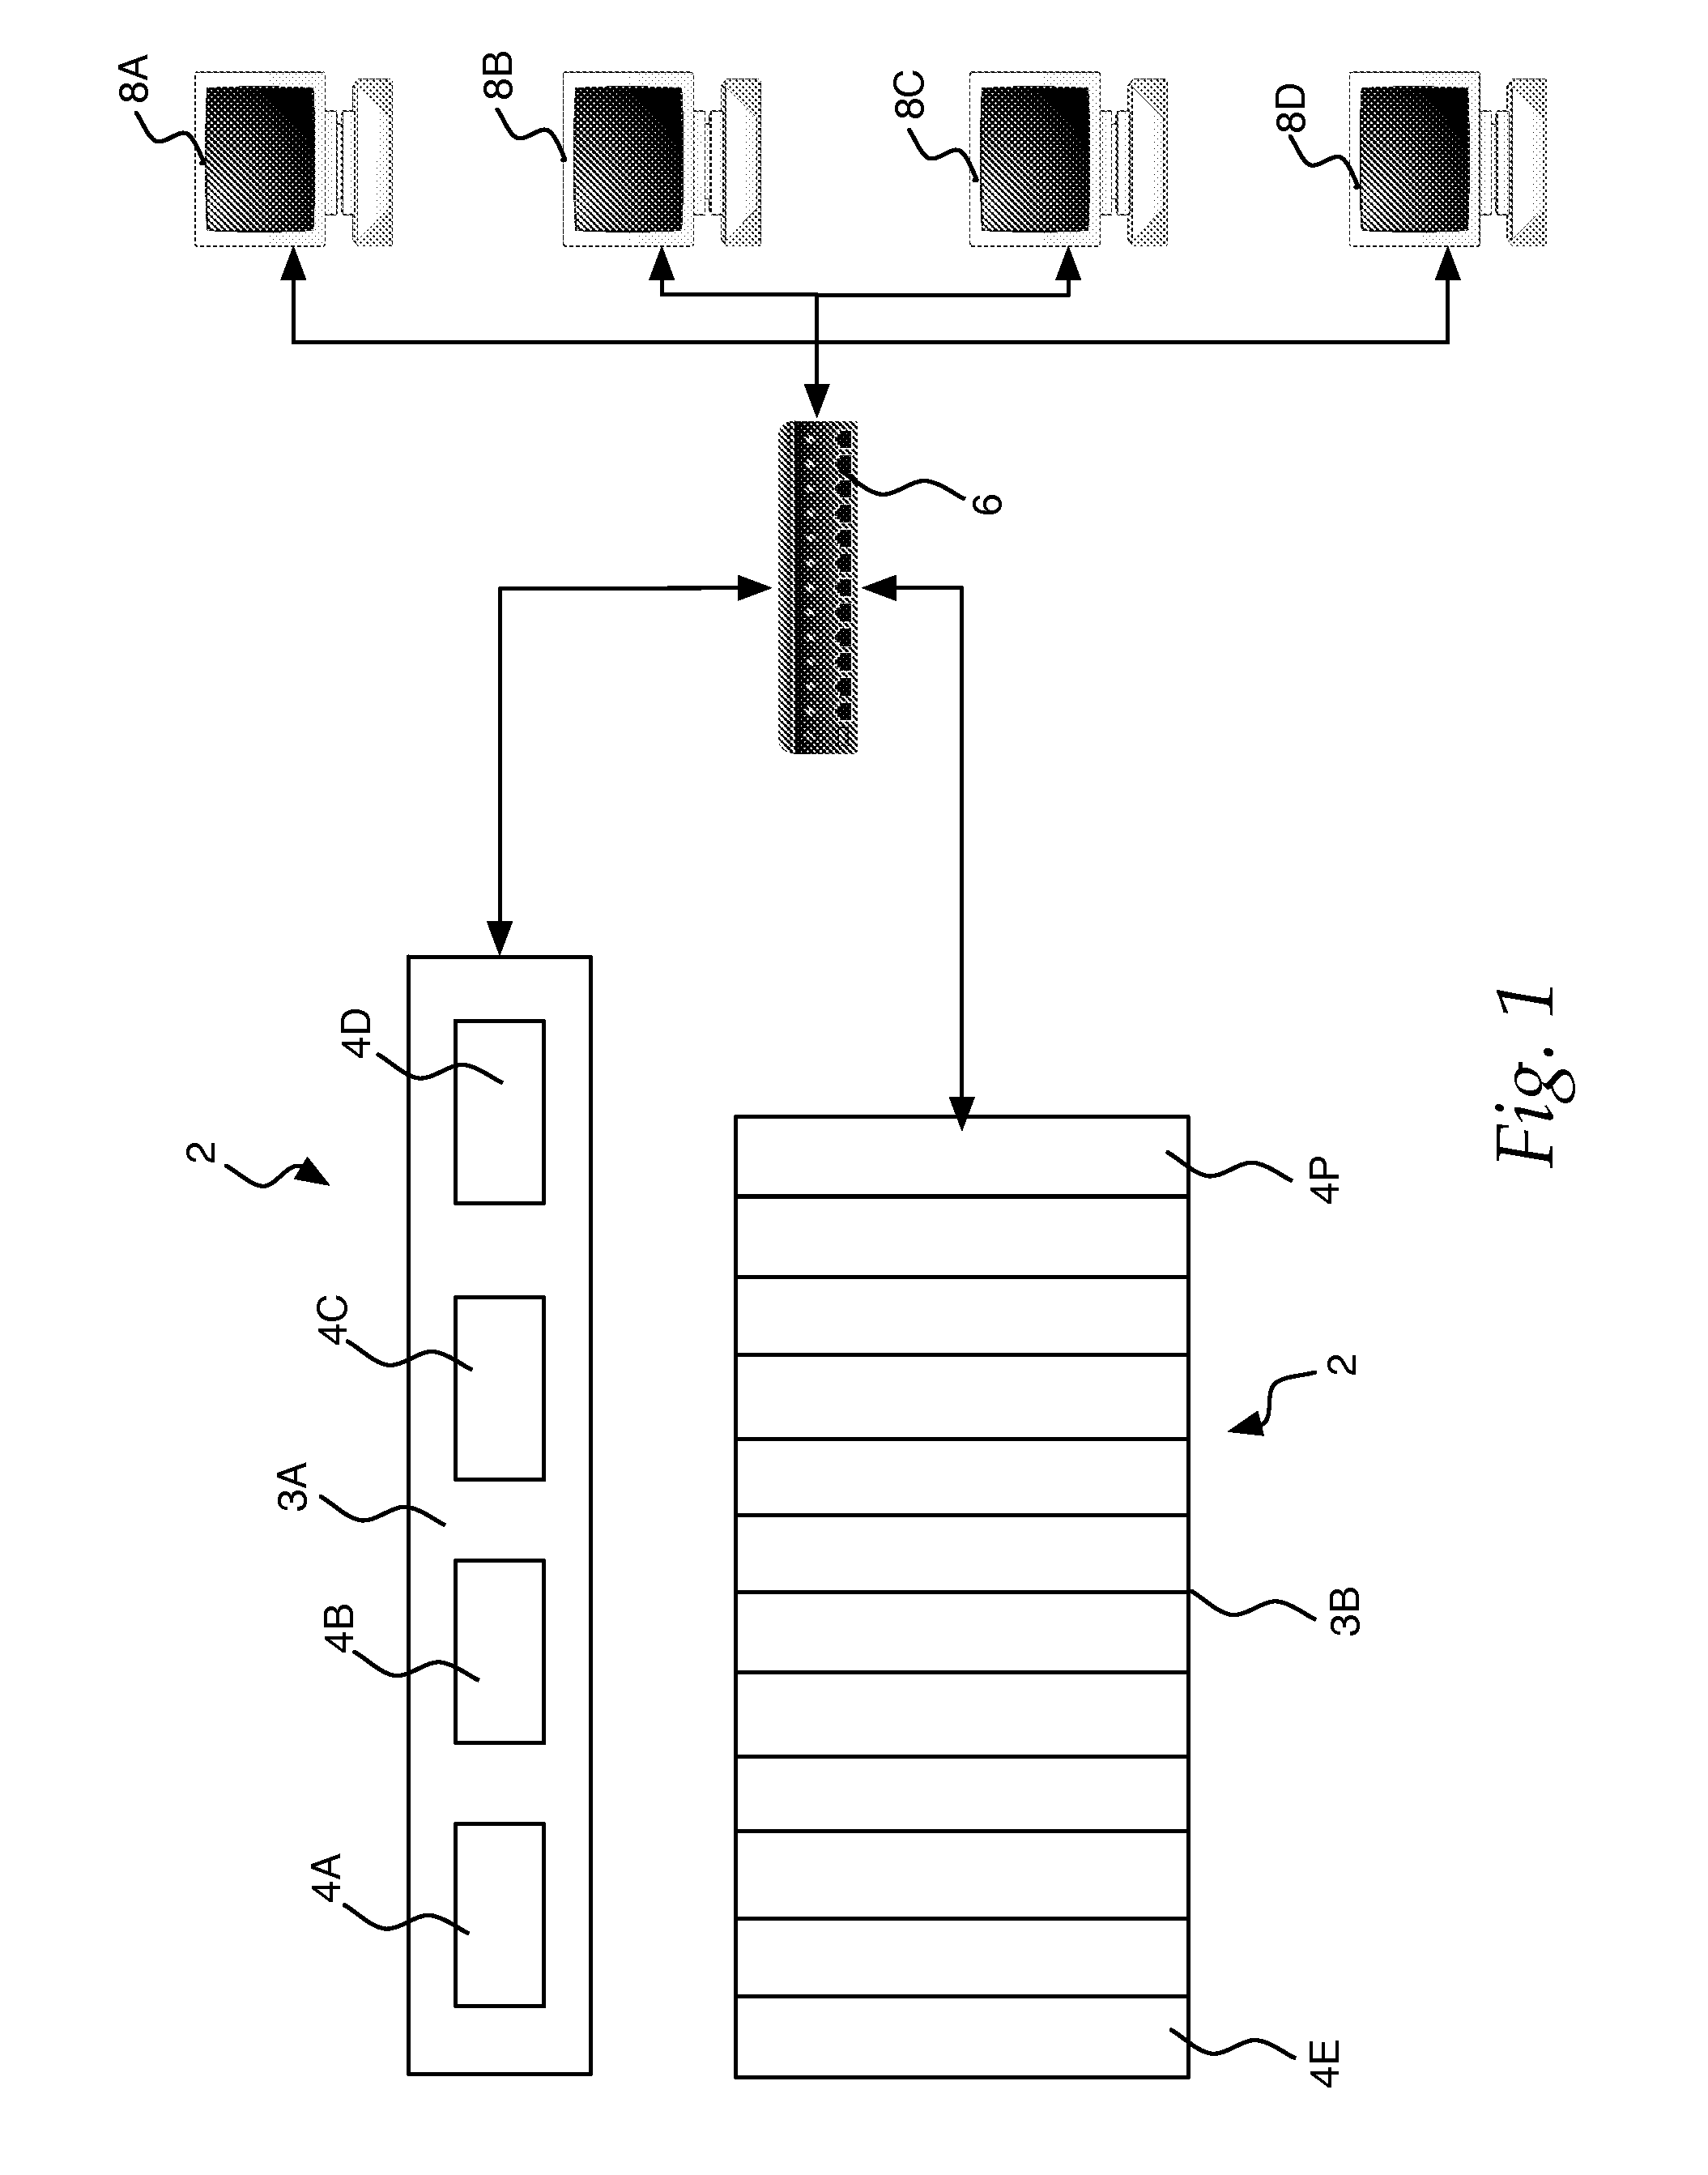 Locking and synchronizing input/output operations in a data storage system